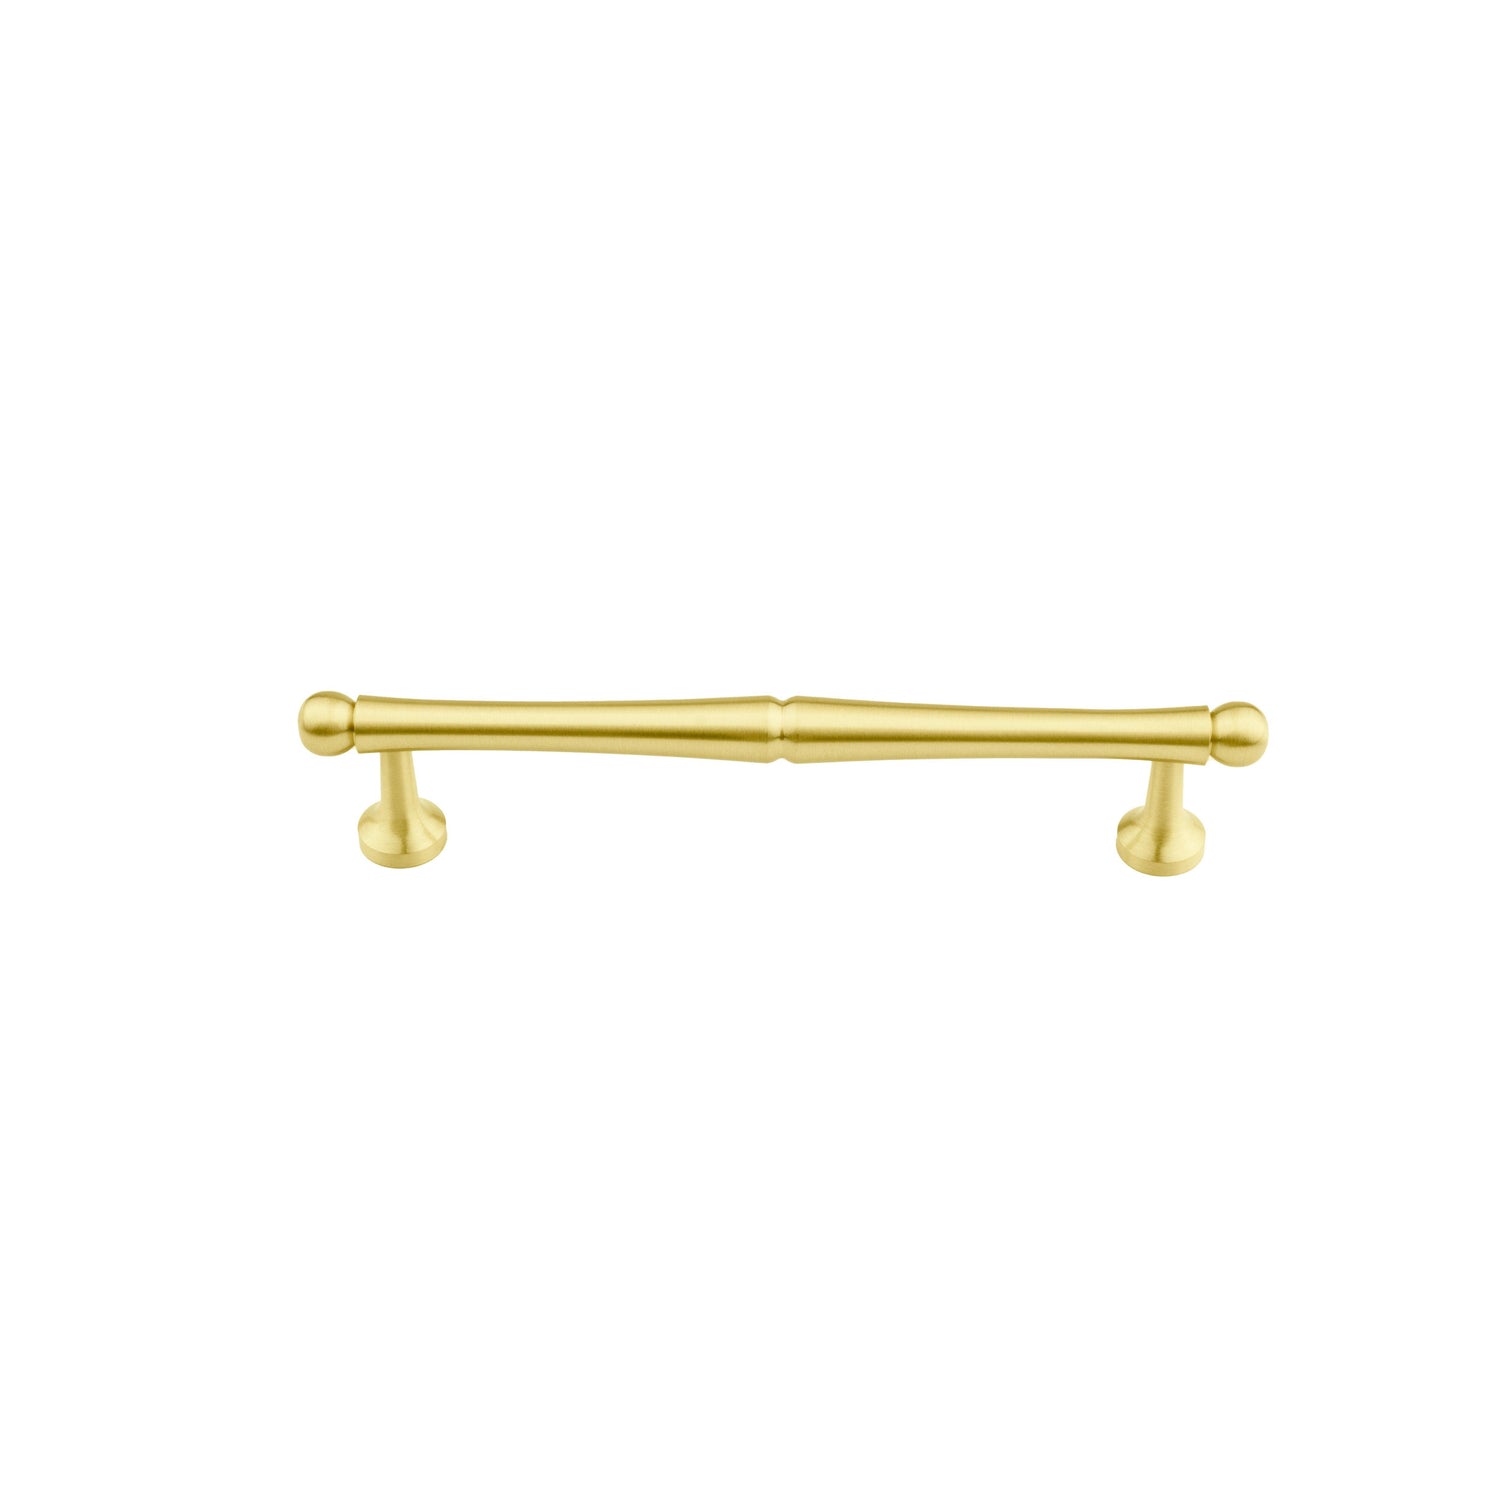 Giselle Handle Handles 160mm / Gold / Brass - M A N T A R A